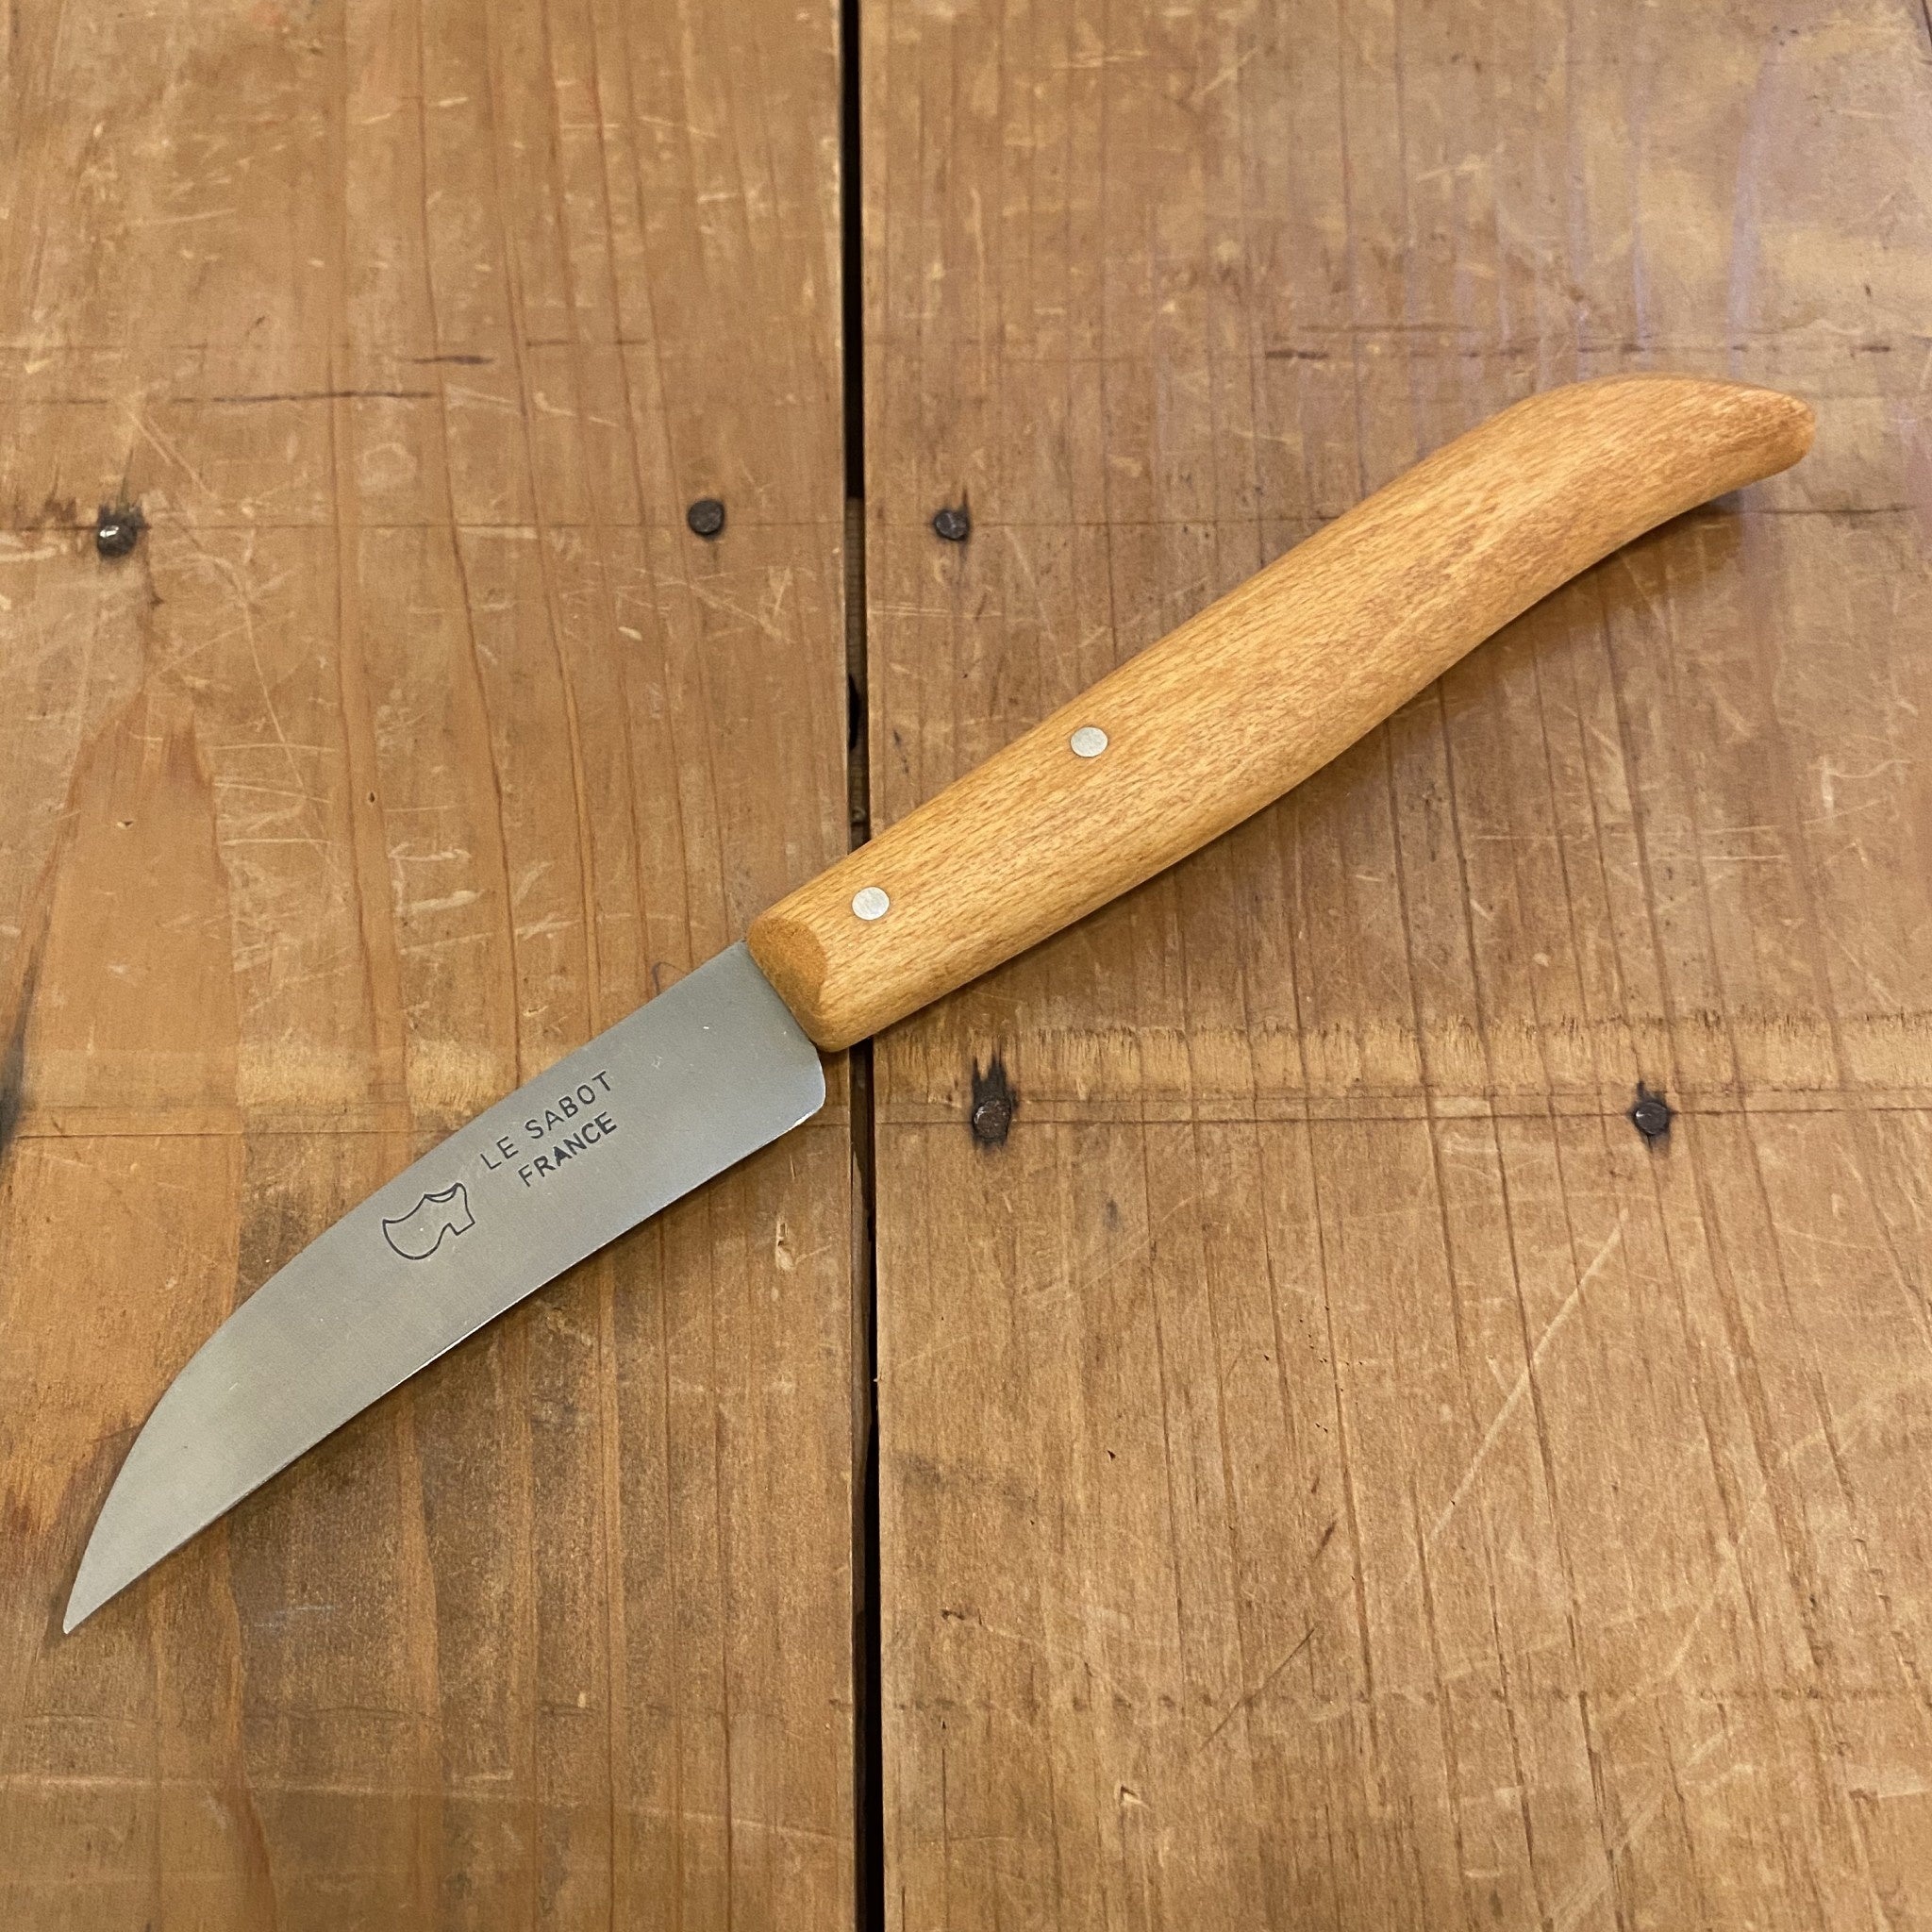 The Bird's Beak Knife: What It Is And How To Use It